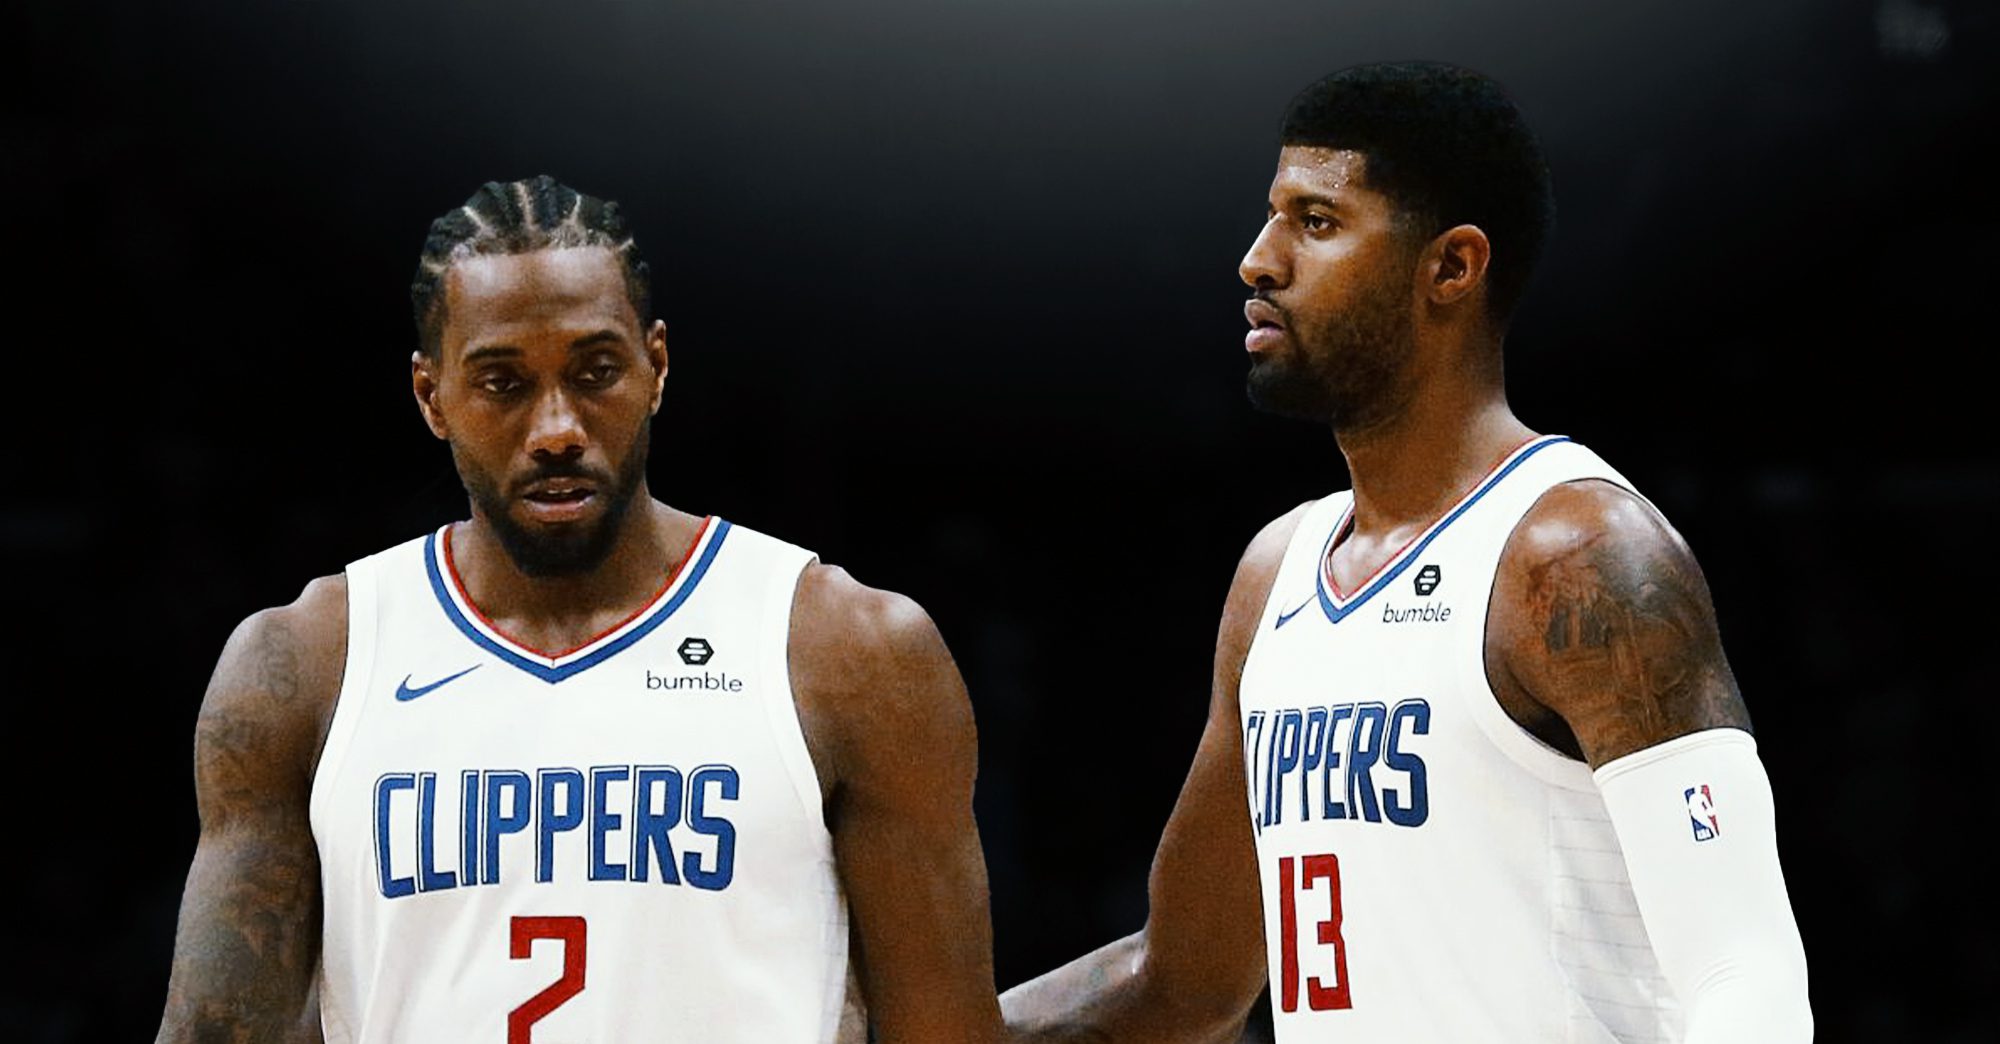 NBA Analyst Calls for Clippers Rebuild After Terrible Game 5 Loss